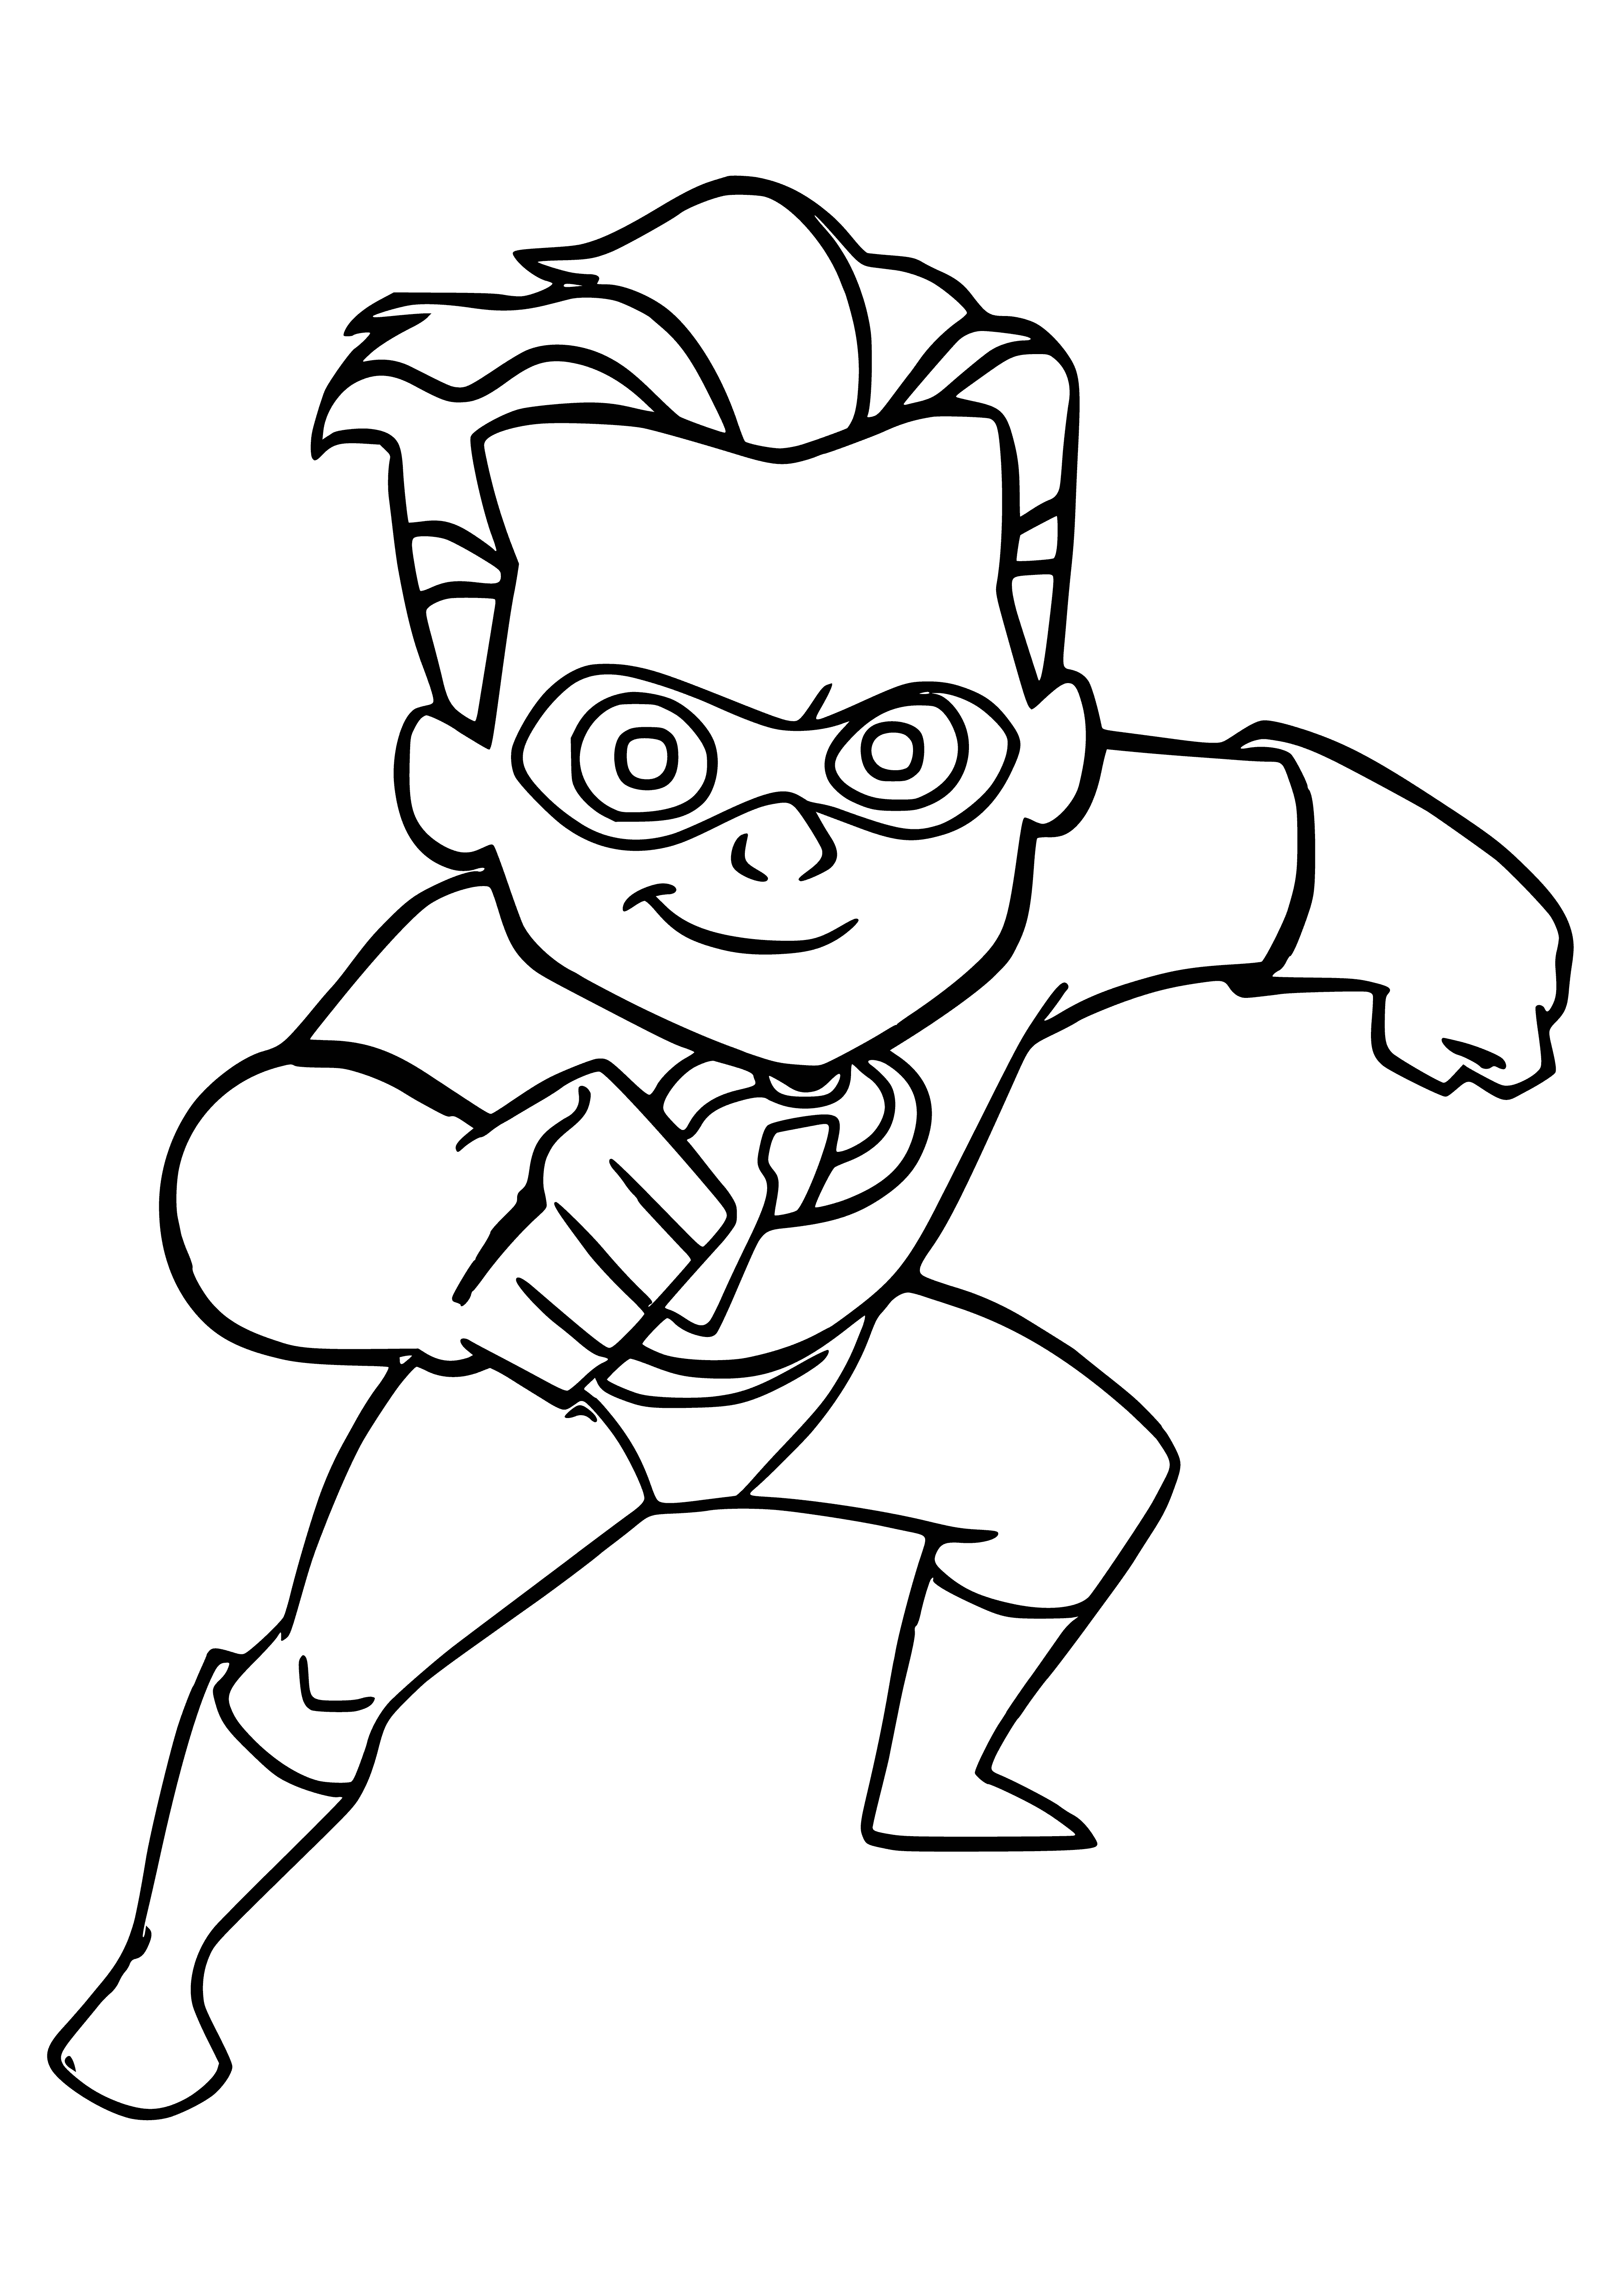 coloring page: Mr. Incredible holds his crying baby Jack-Jack, looking concerned as Jack-Jack reaches for something off-screen. Coloring page from Disney's The Incredibles.